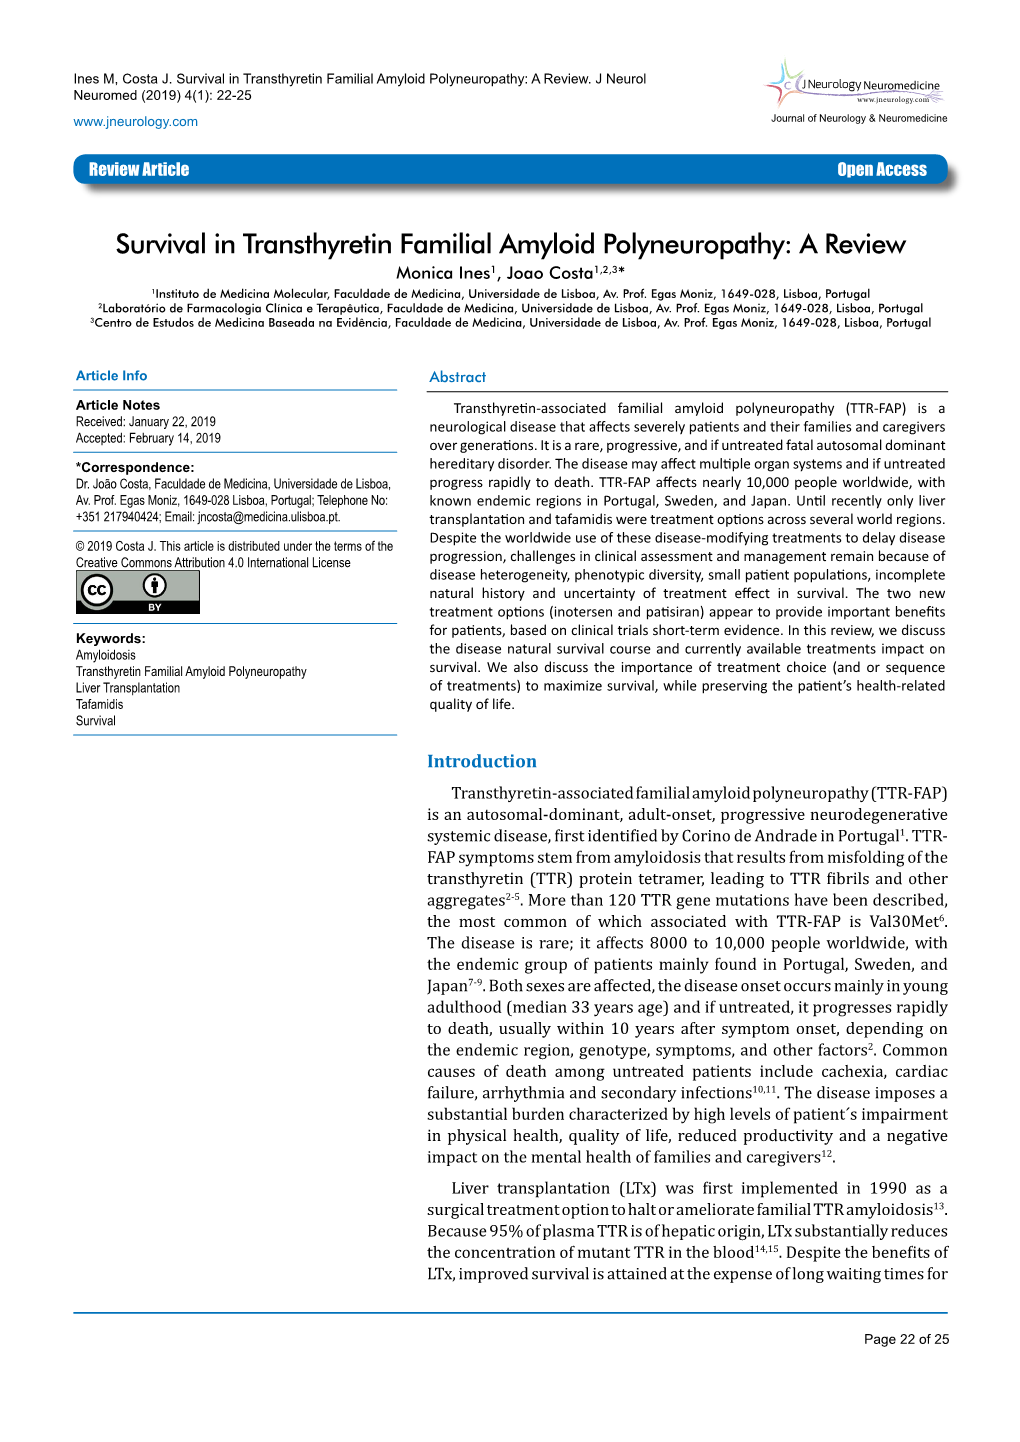 Survival in Transthyretin Familial Amyloid Polyneuropathy: a Review